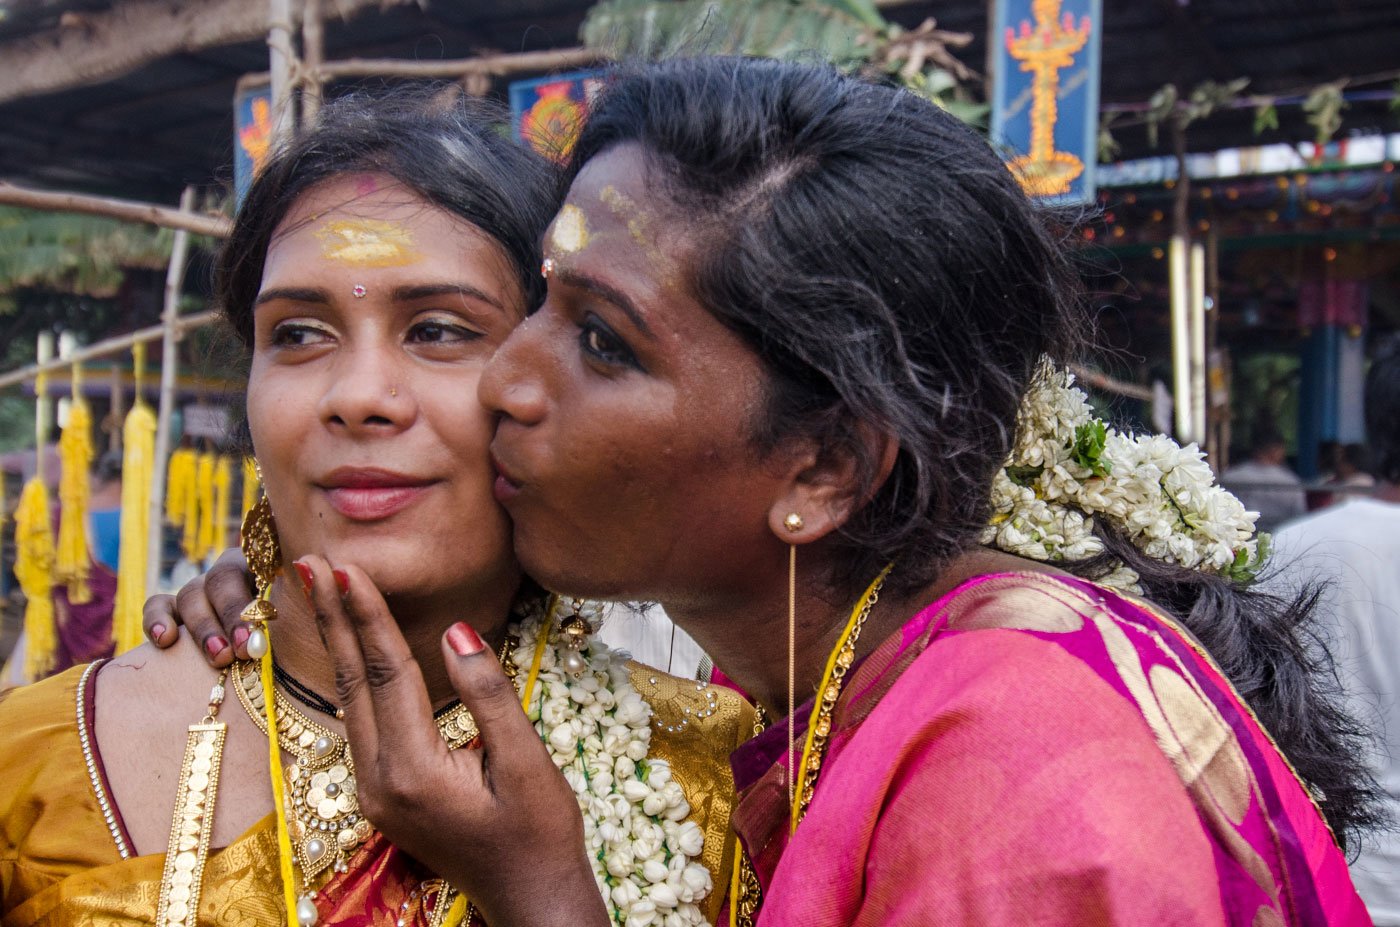 Once they’ve tied the knot, the aravanis rejoice. Pinky (right), in a gleeful moment, kisses her best friend and sister bride Mala. A transgender woman kisses another transgender woman on the cheek.